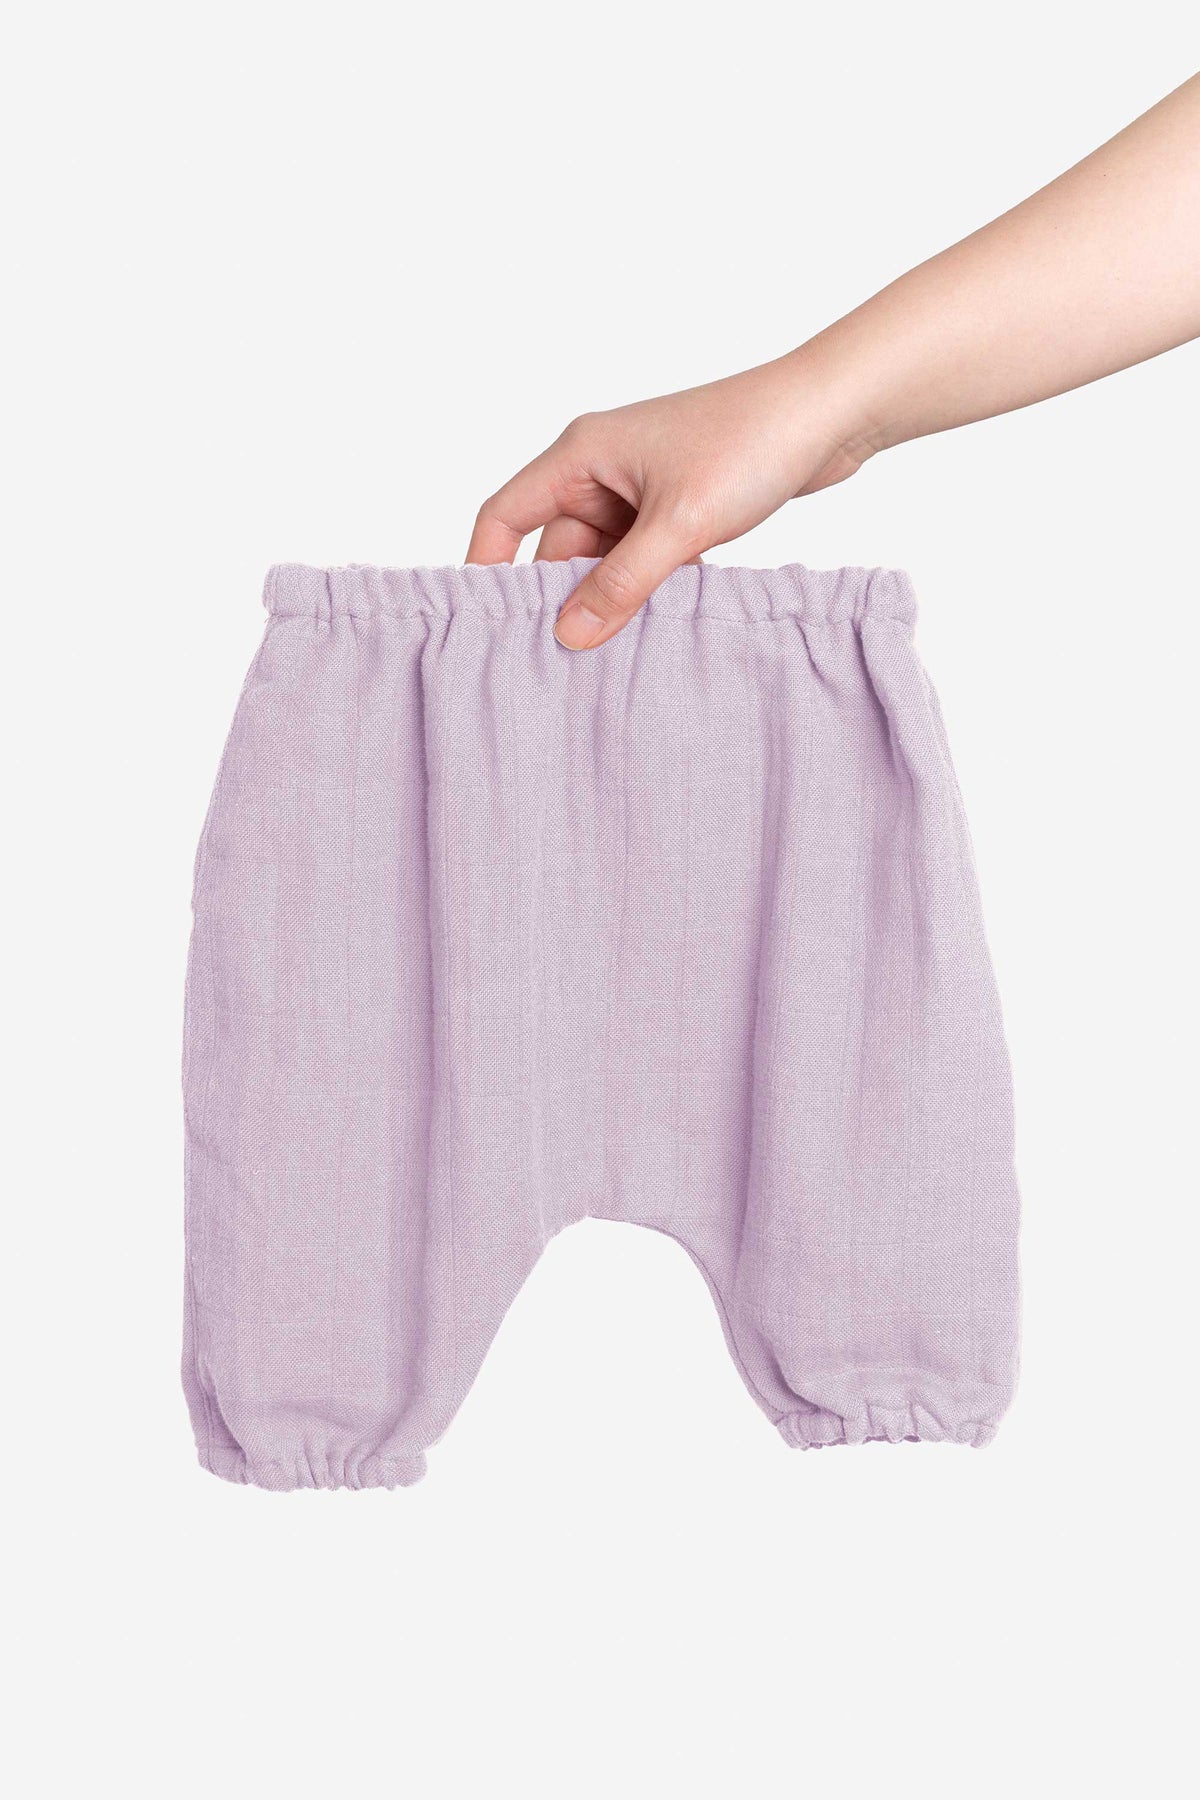 Baby and Toddler Harem Pants – 5 colours available